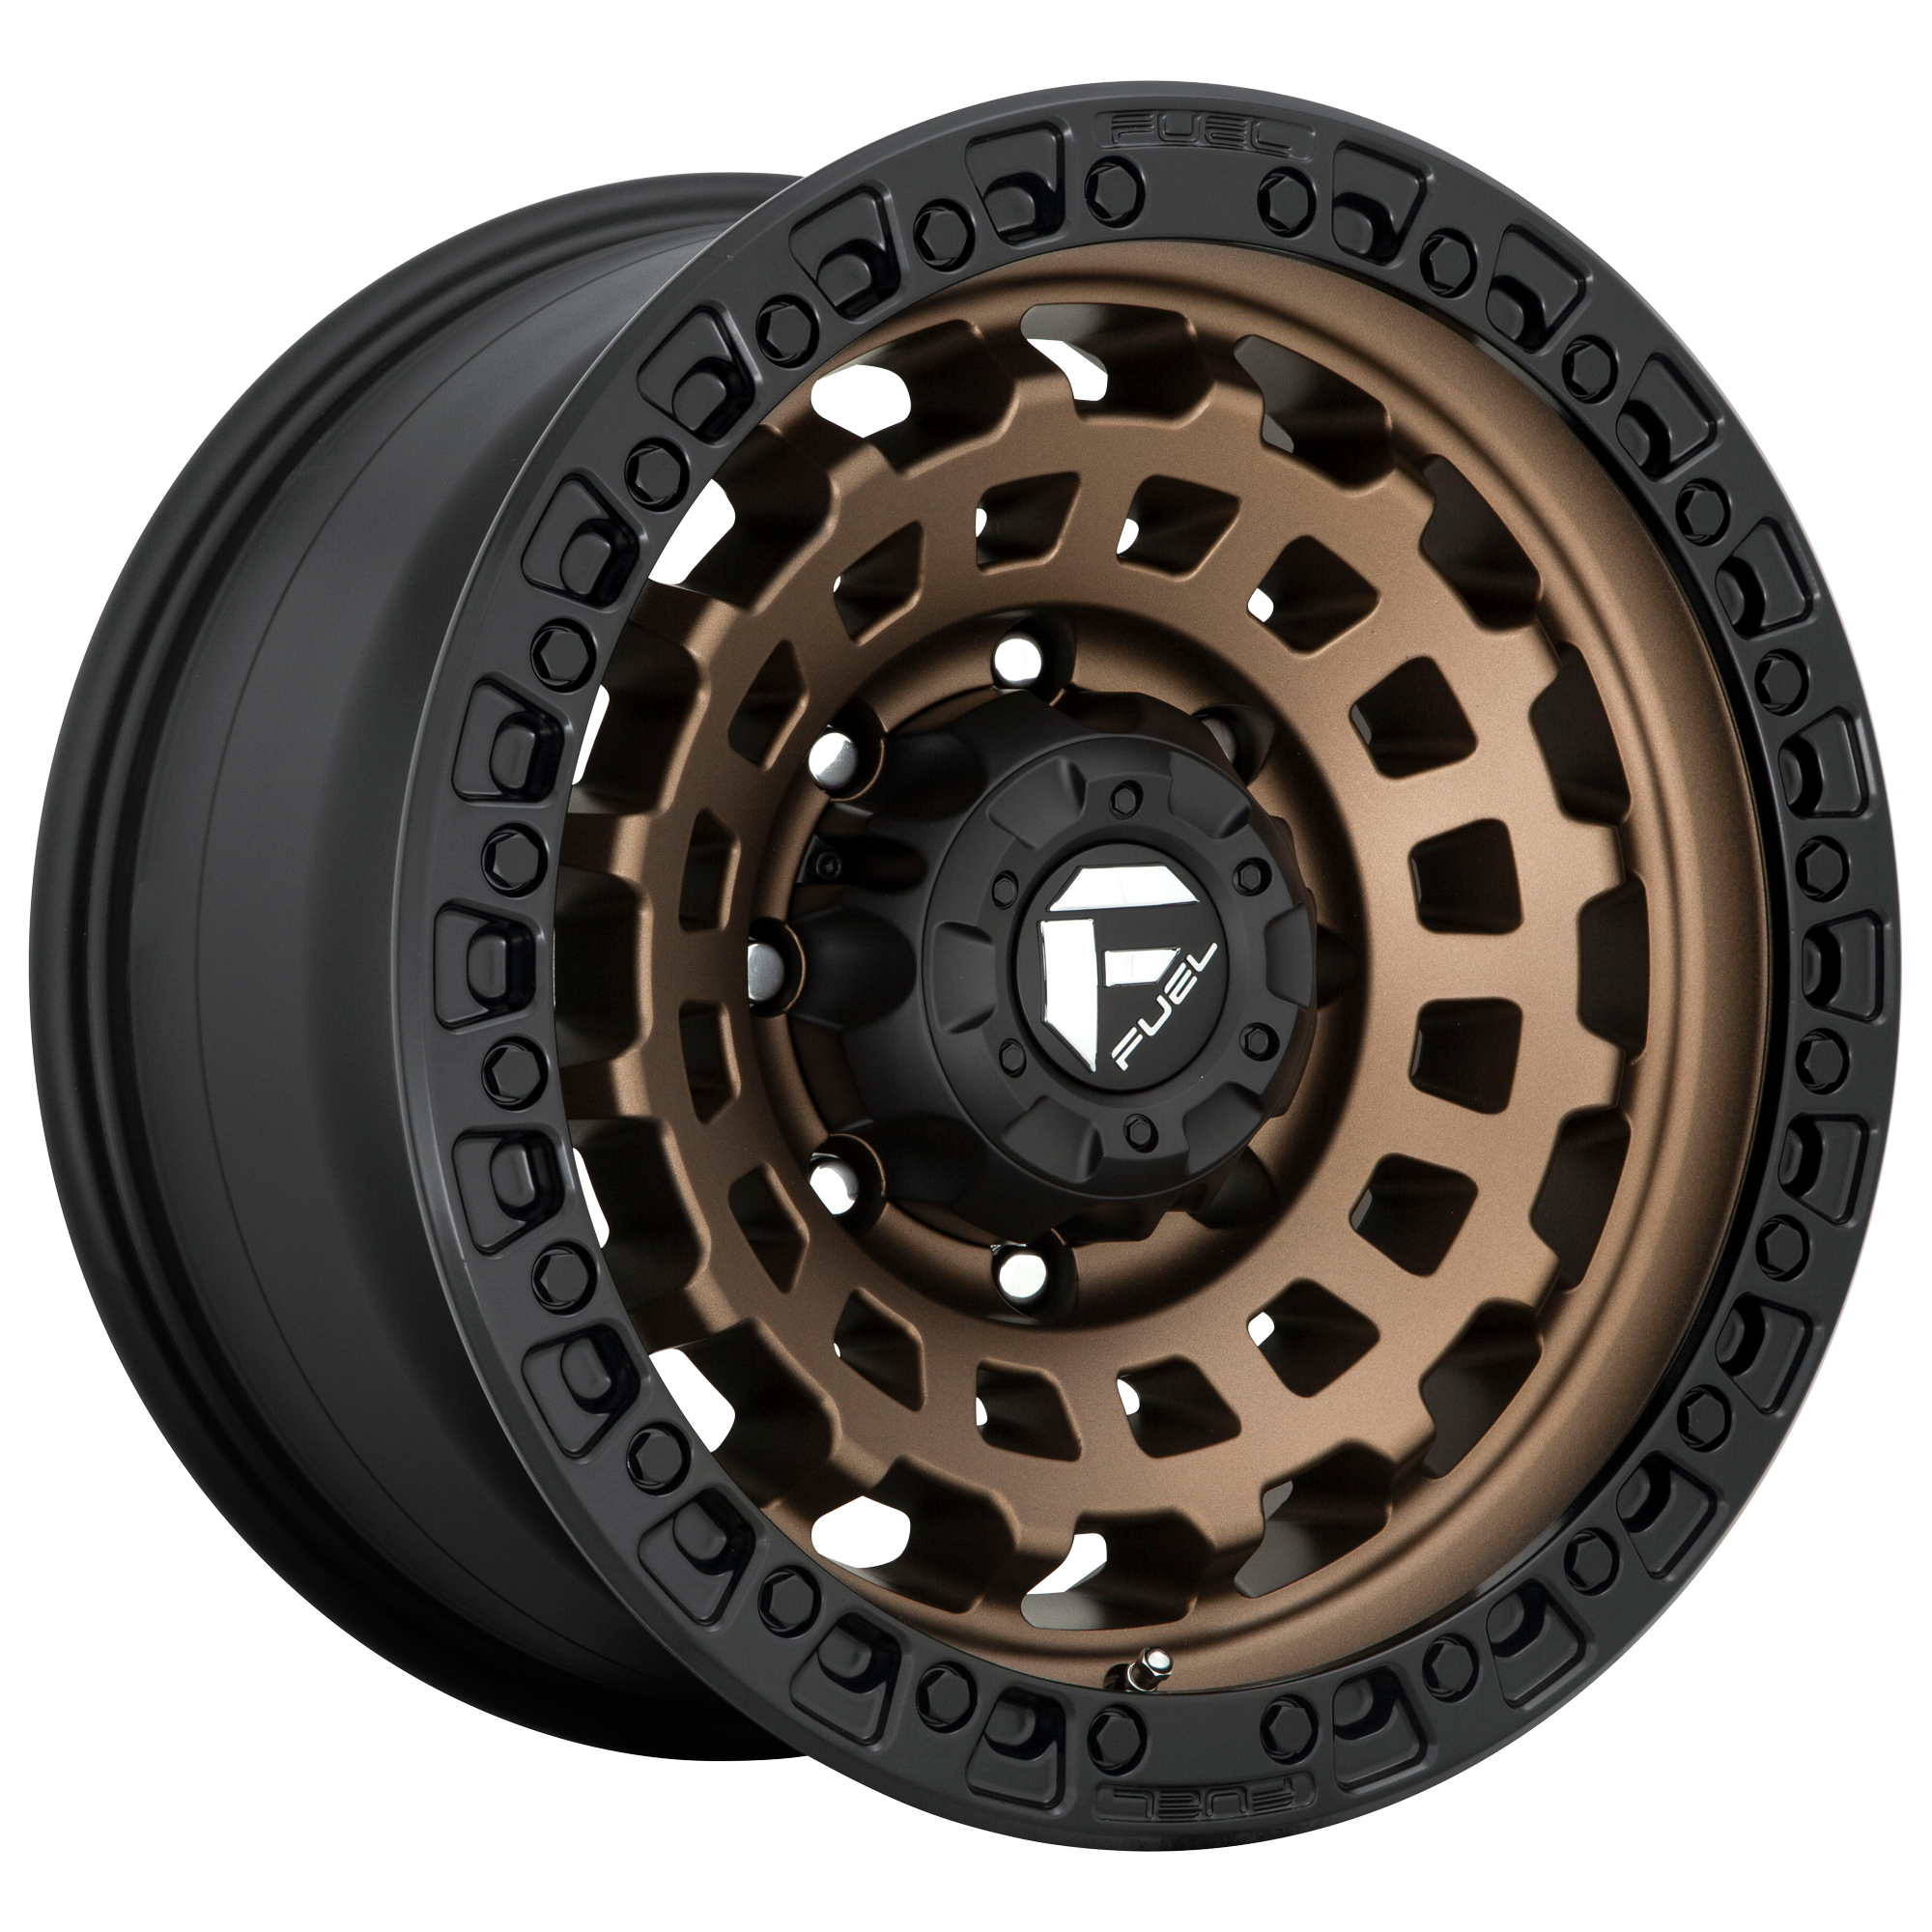 ZEPHYR 17x9 5x150.00 MATTE BRONZE BLACK BEAD RING (1 mm) - Tires and Engine Performance